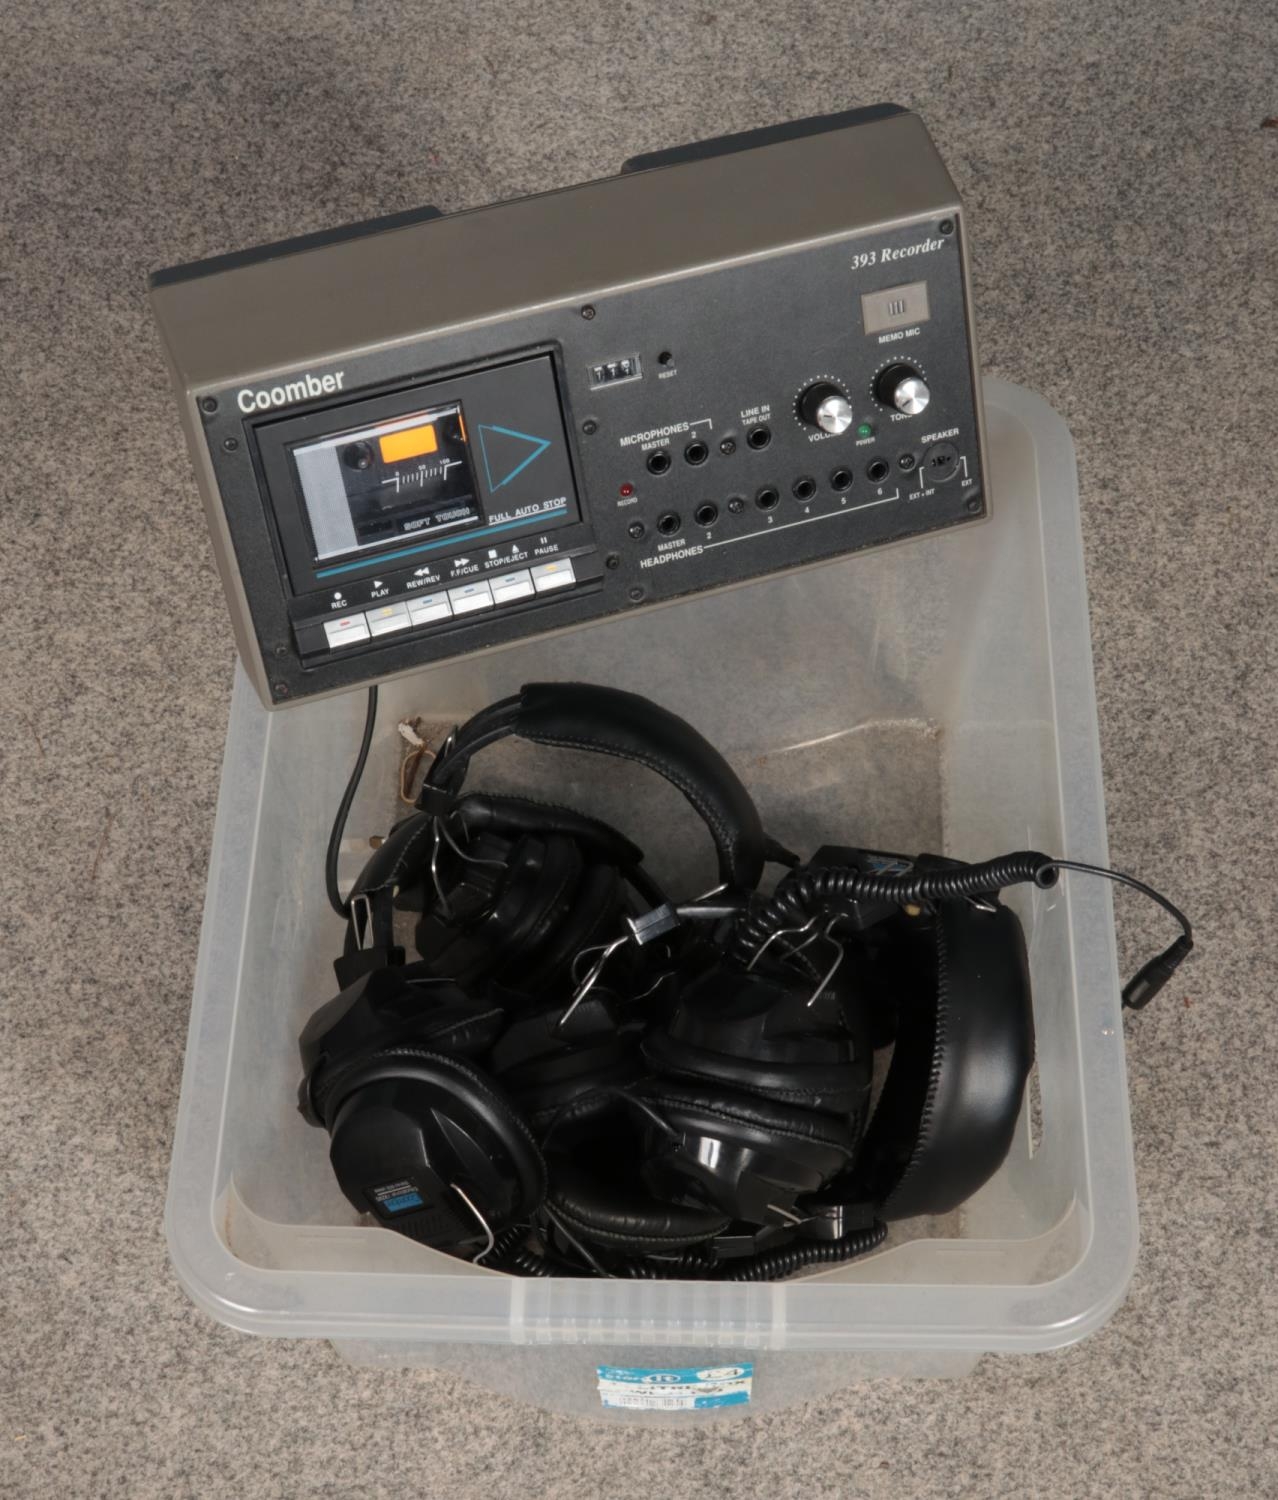 A Coomber Model 393 recorder along with six sets of Coomber headphones.